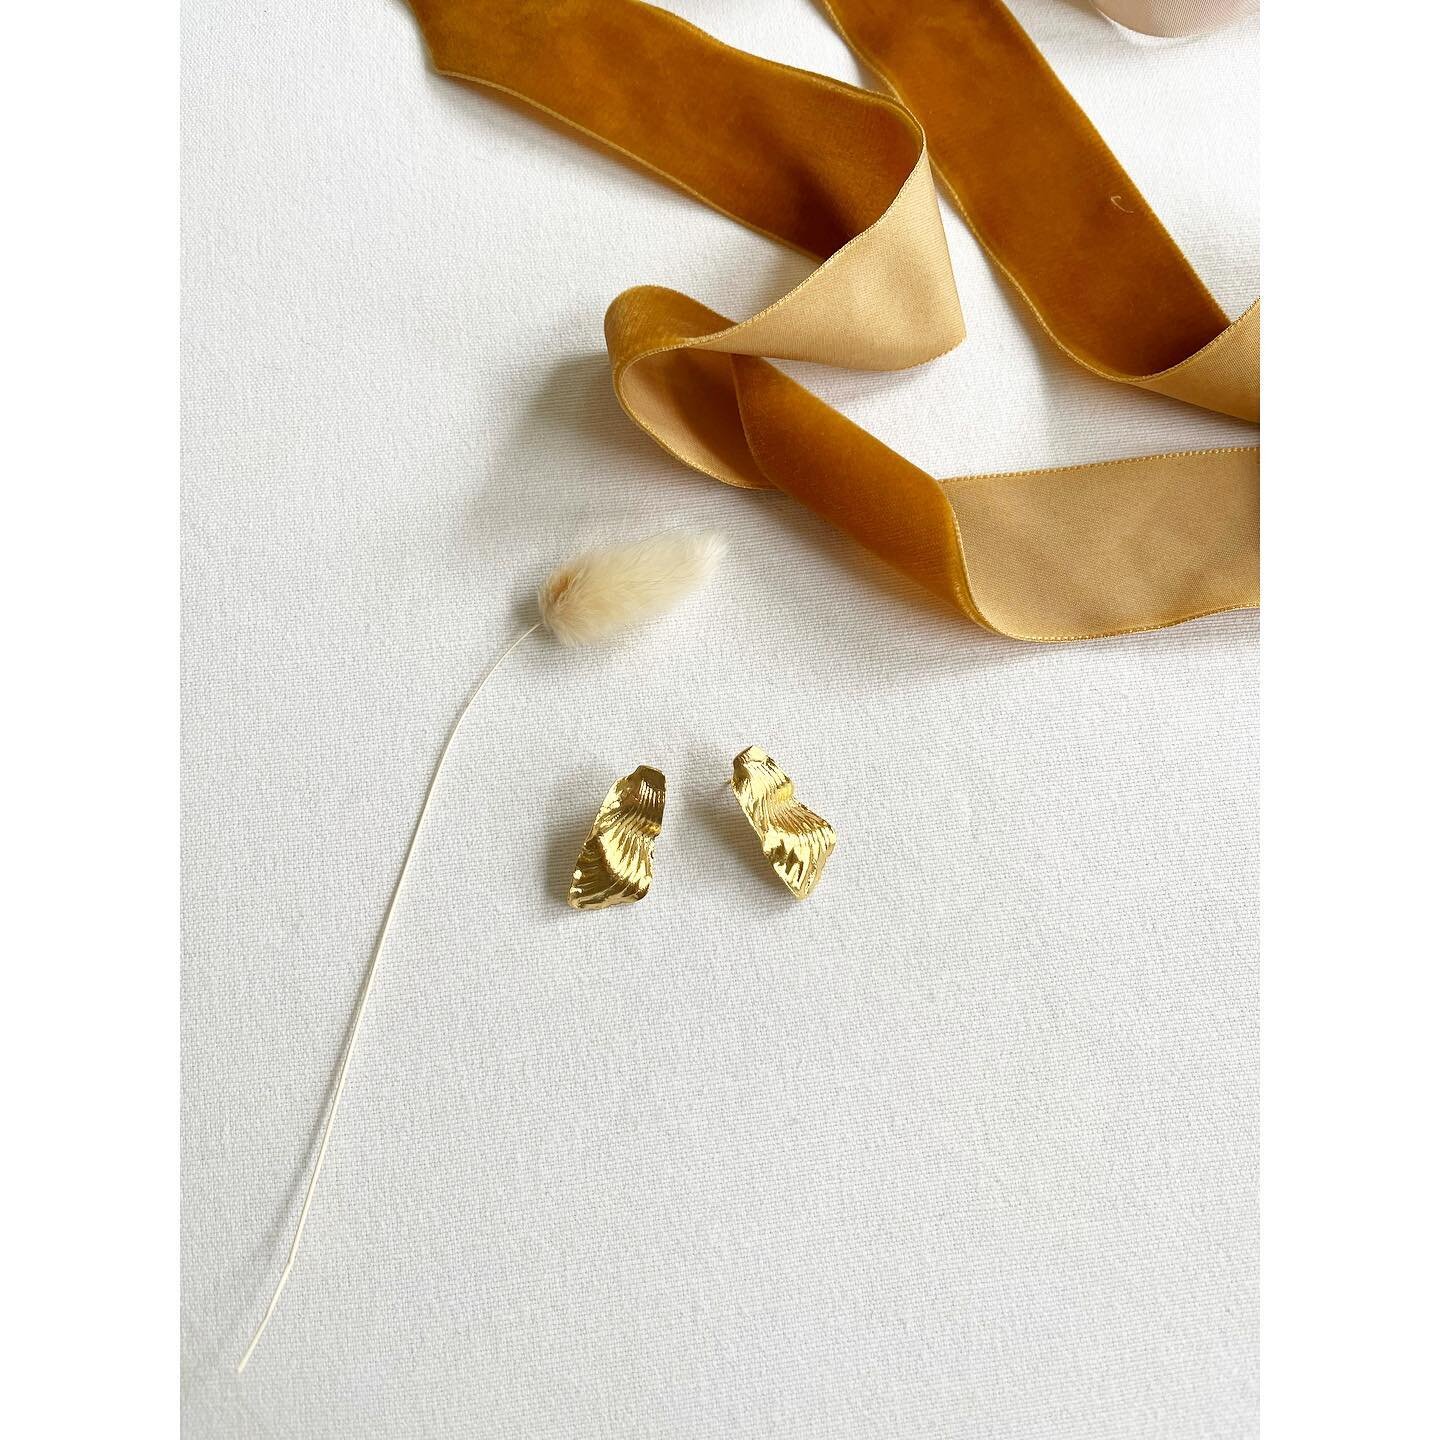 The shell earrings&hellip;made by wrapping a thin layer of wax around a shell and then casting in recycled silver using the lost wax process. These earrings come in silver and gold plated and as a matching pair or as a mismatched pair (as seen in the